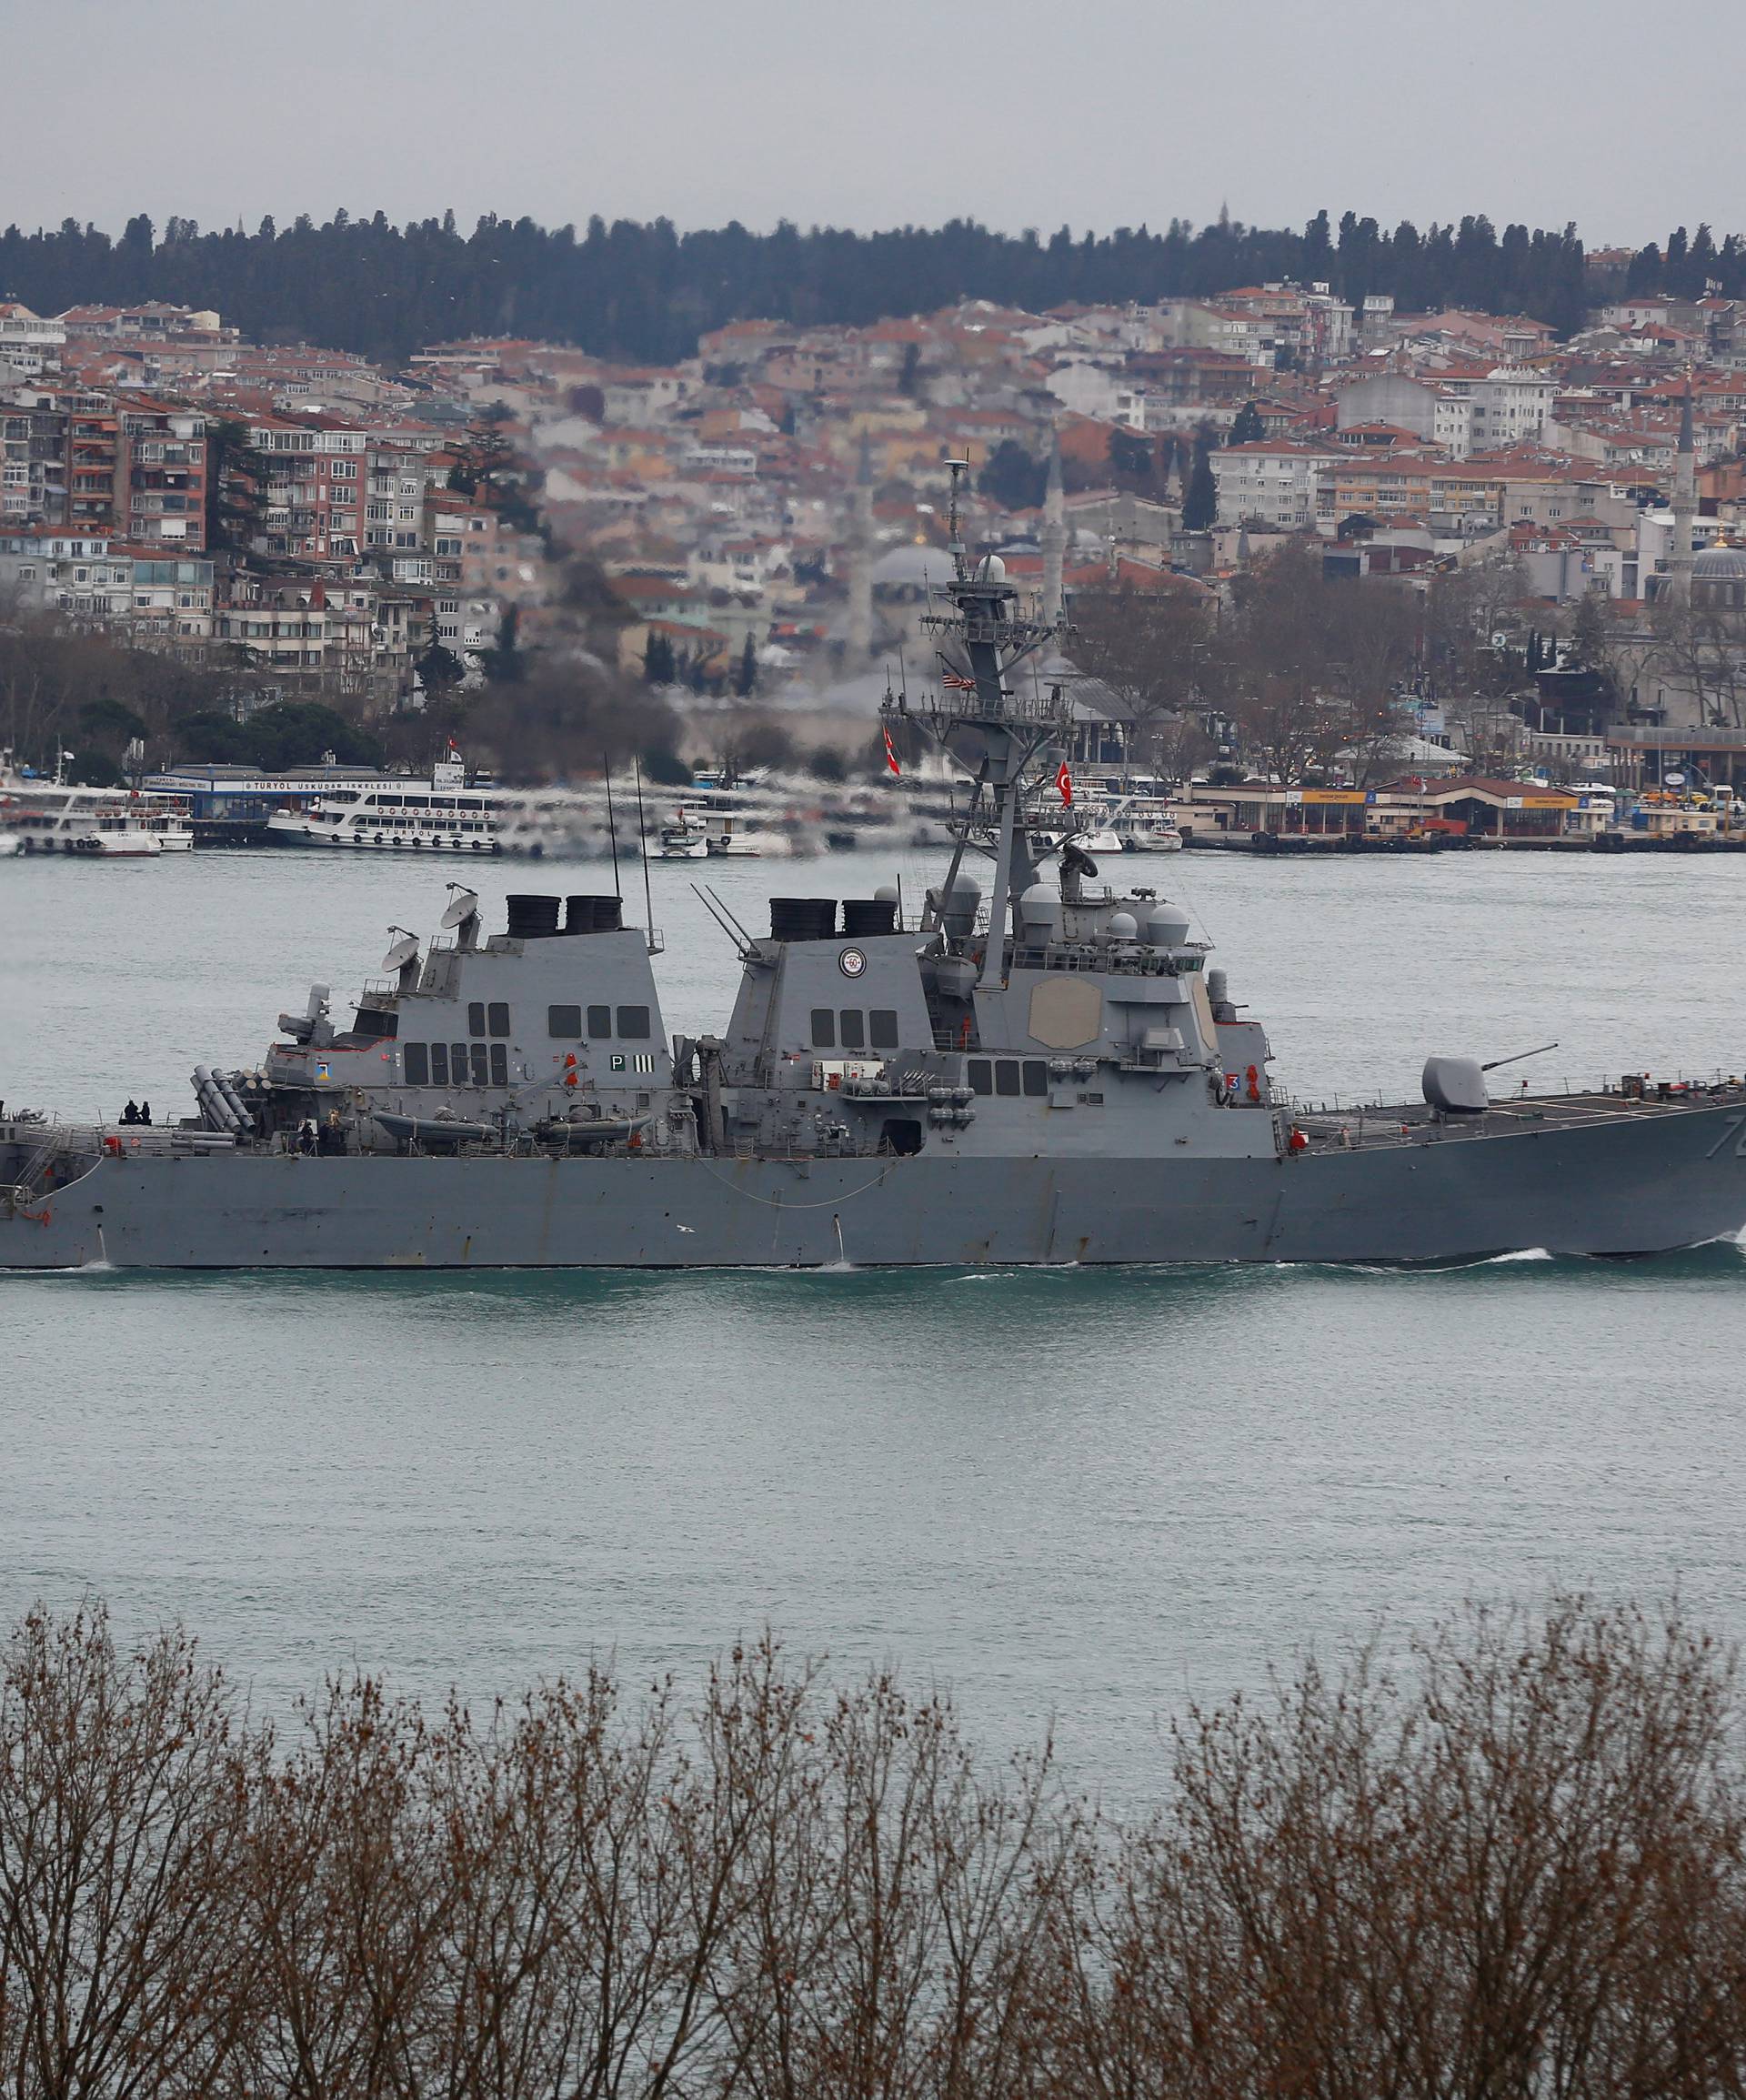 U.S. Navy guided-missile destroyer USS Porter sails in the Bosphorus, on its way to the Mediterranean Sea, in Istanbul